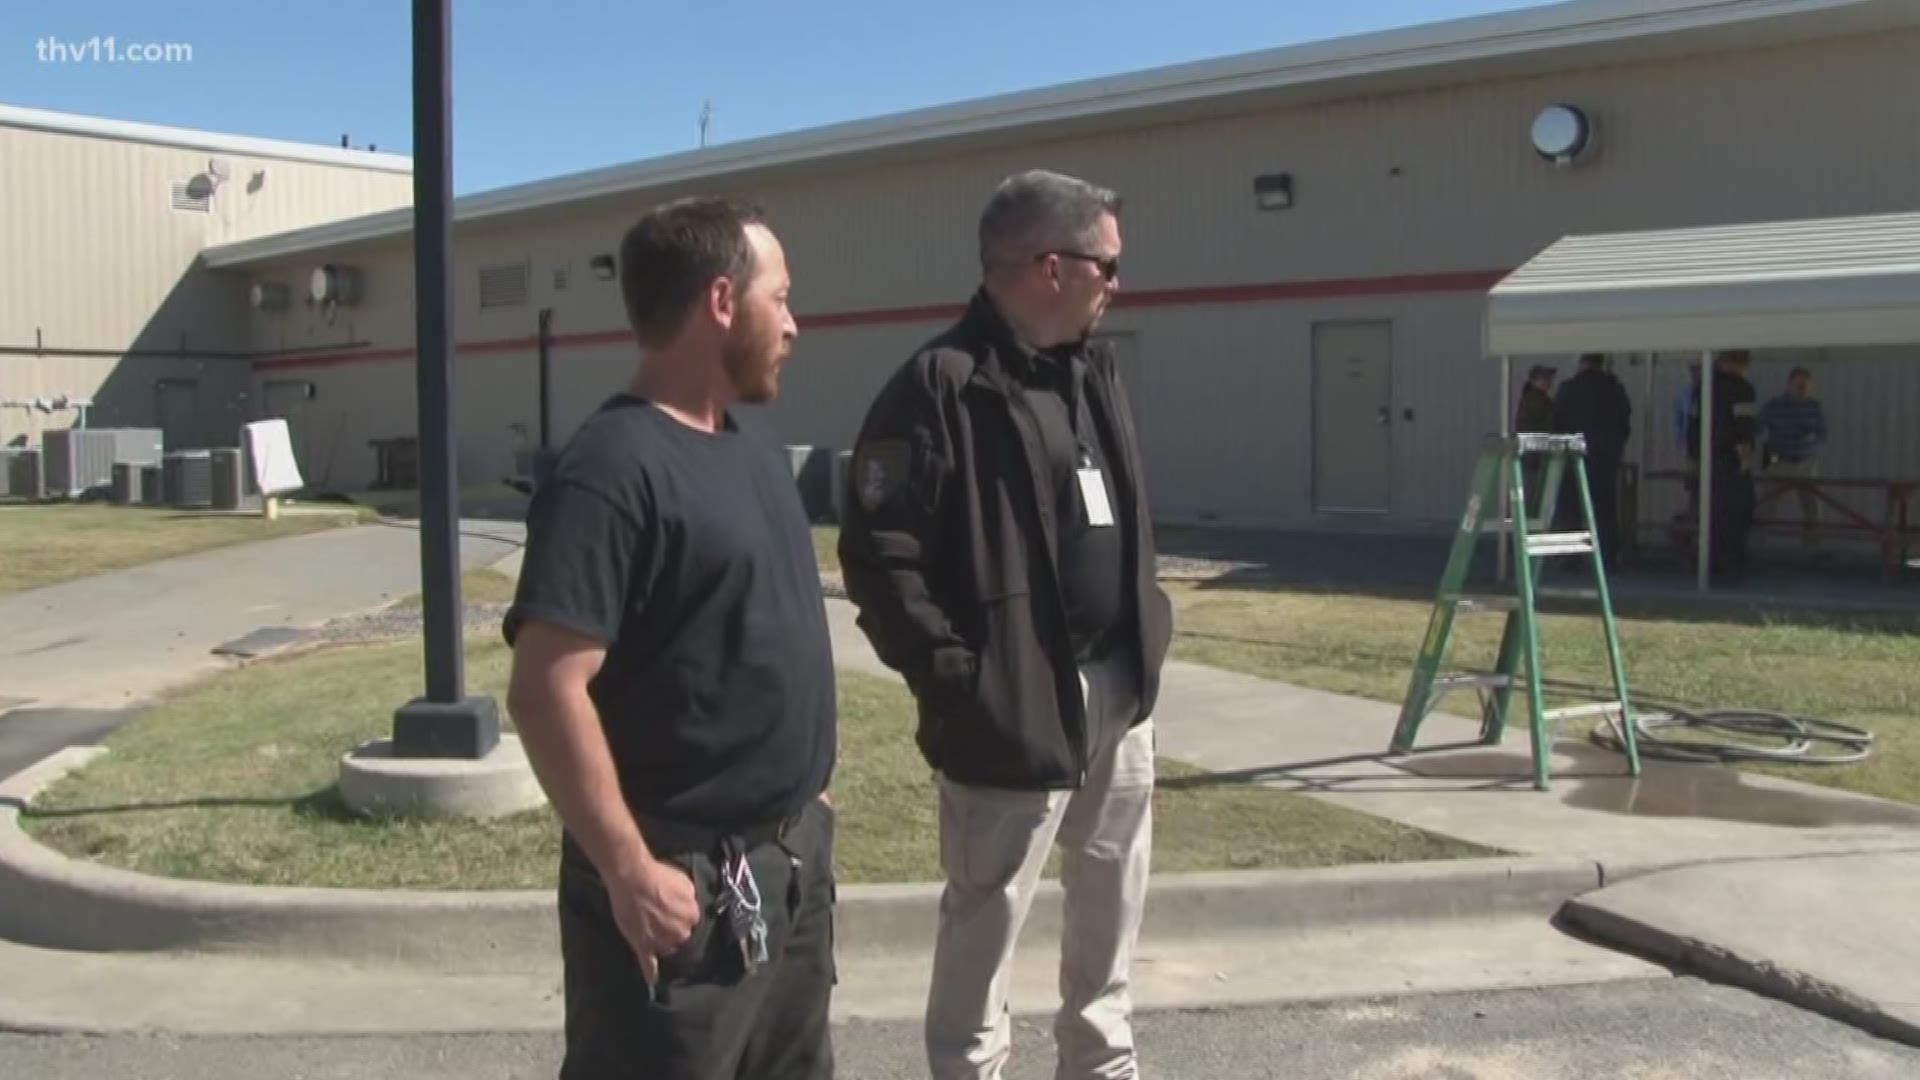 A Lonoke Co. jail inmate gets a second chance